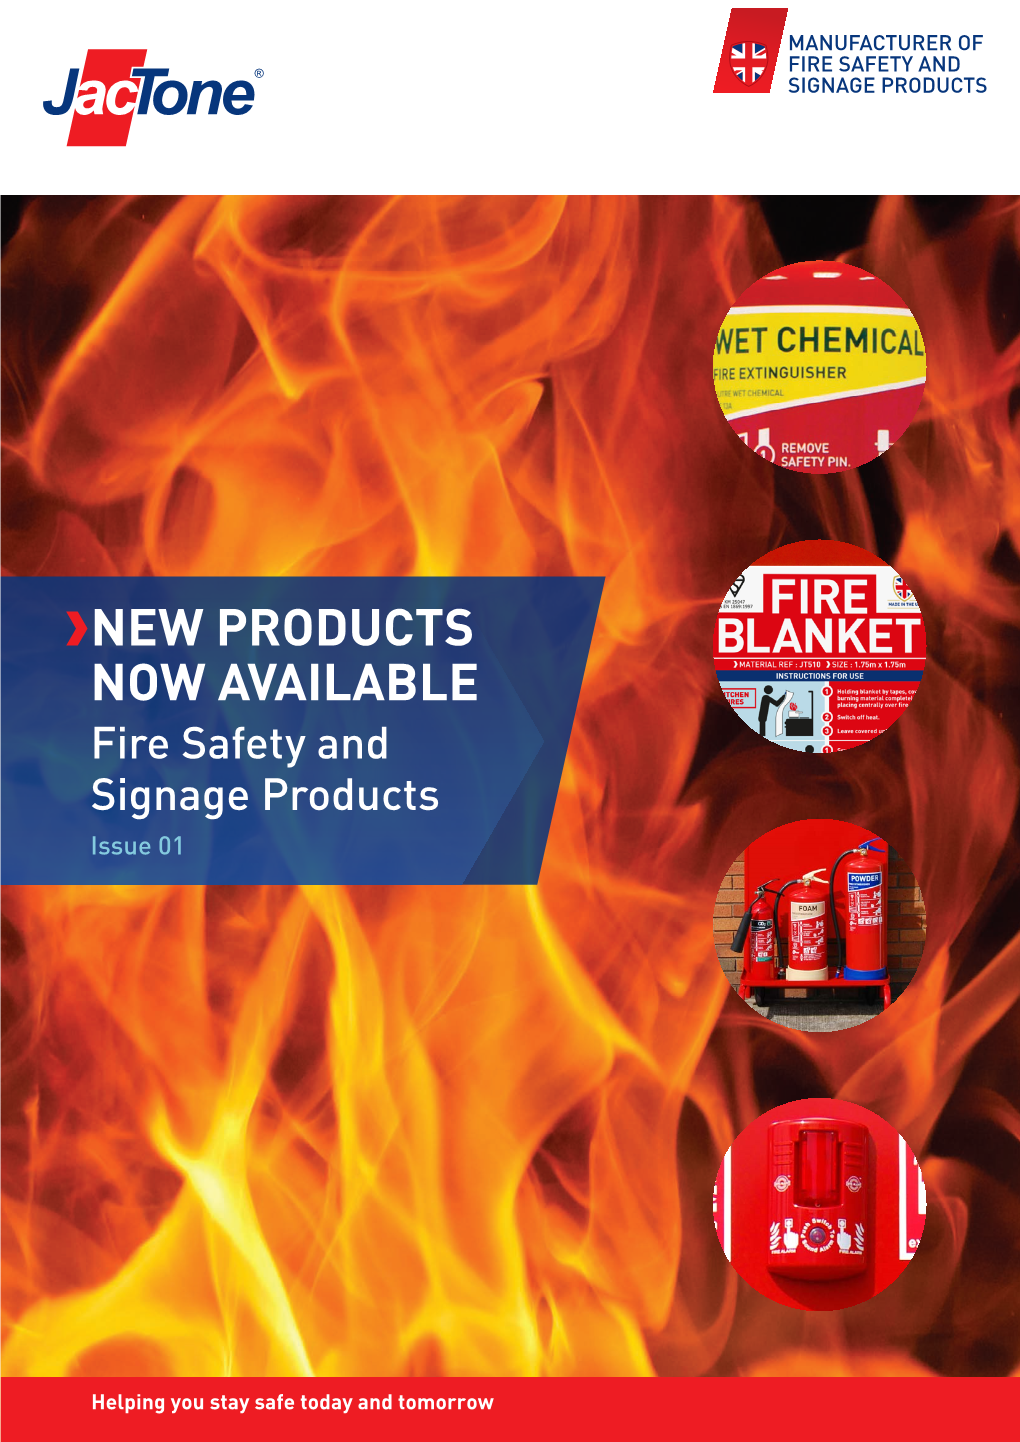 NEW PRODUCTS NOW AVAILABLE Fire Safety and Signage Products Issue 01 WELCOME